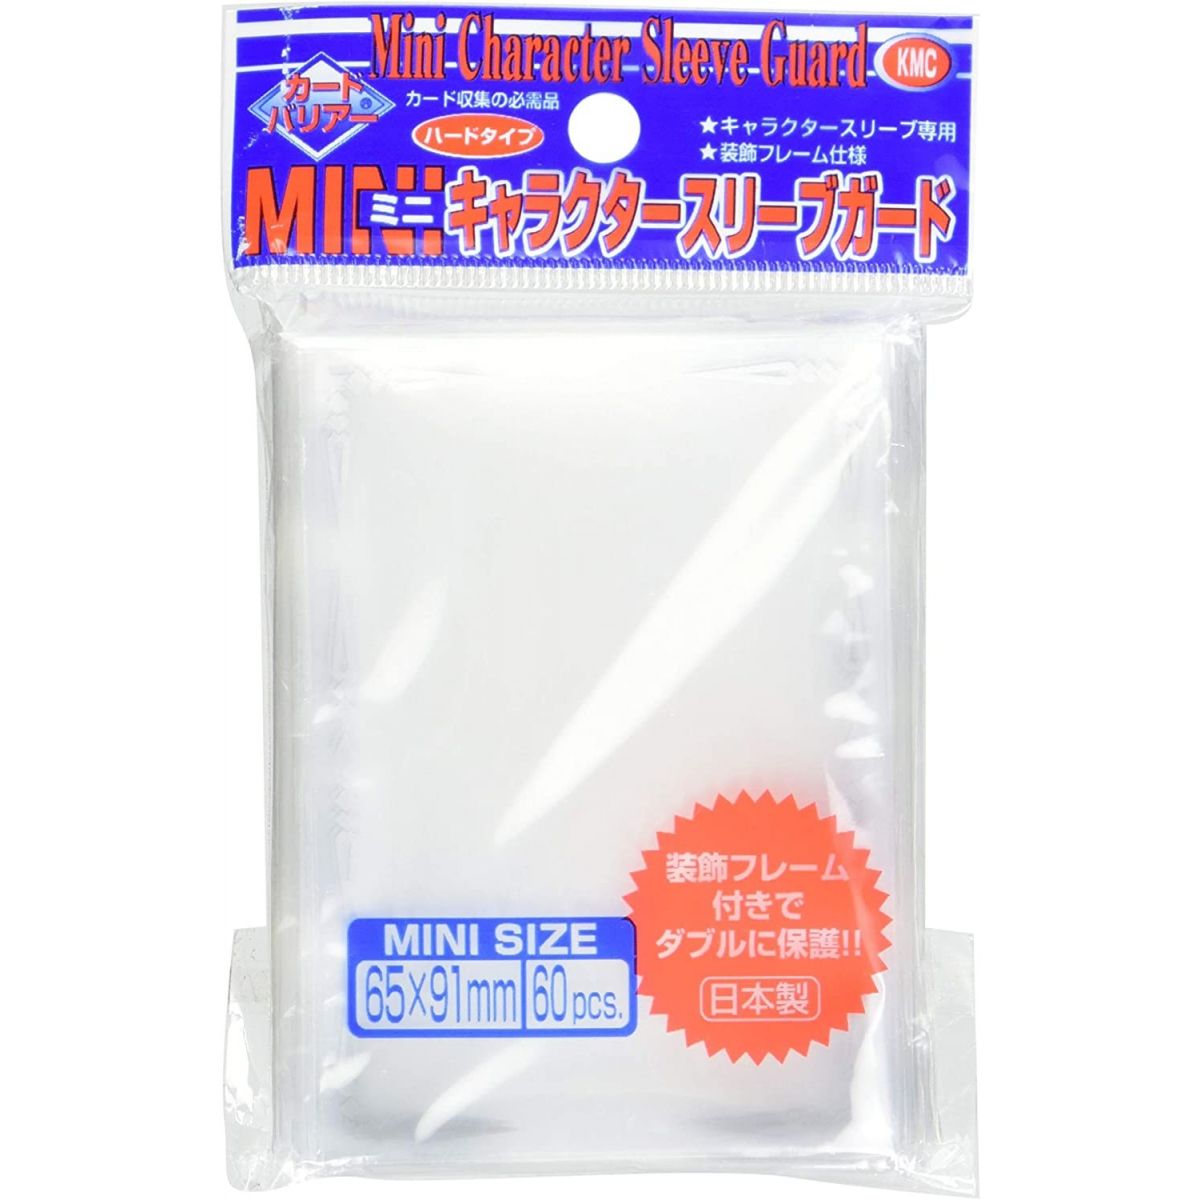 KMC - Sur-Sleeves Outer - Small - Mini Character Sleeve Guard